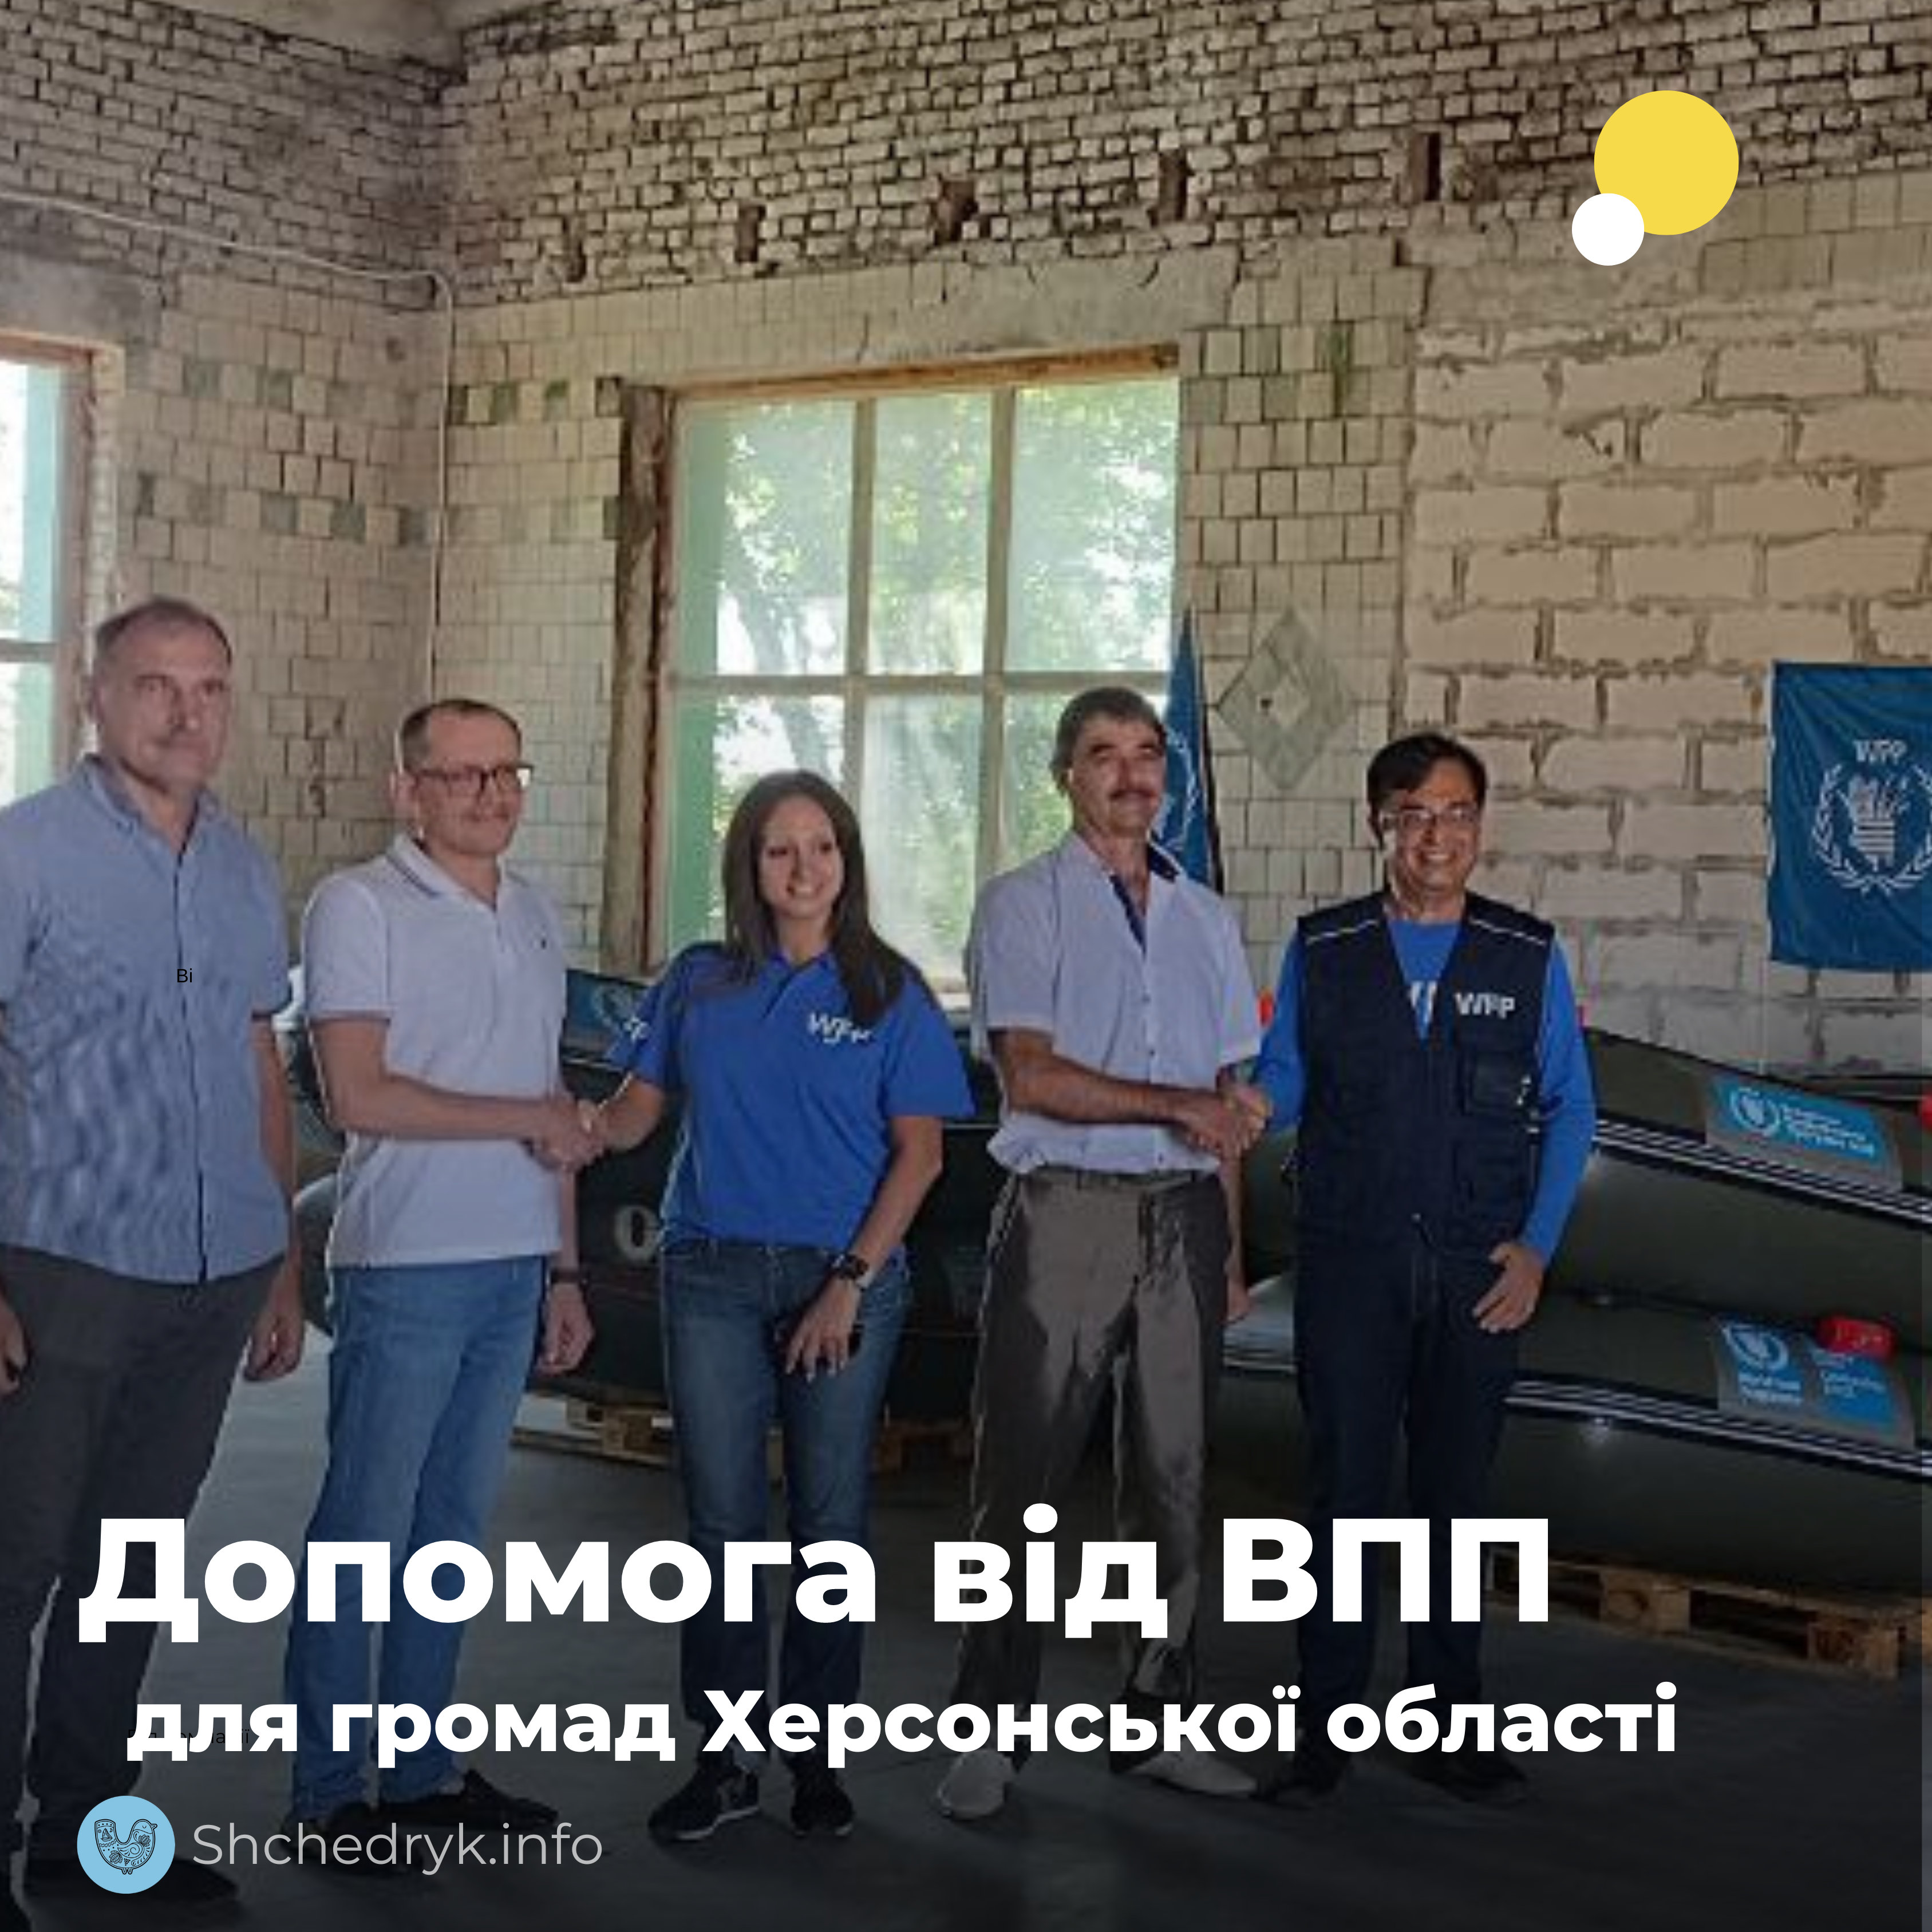 Assistance from the WFP for communities in Kherson Oblast